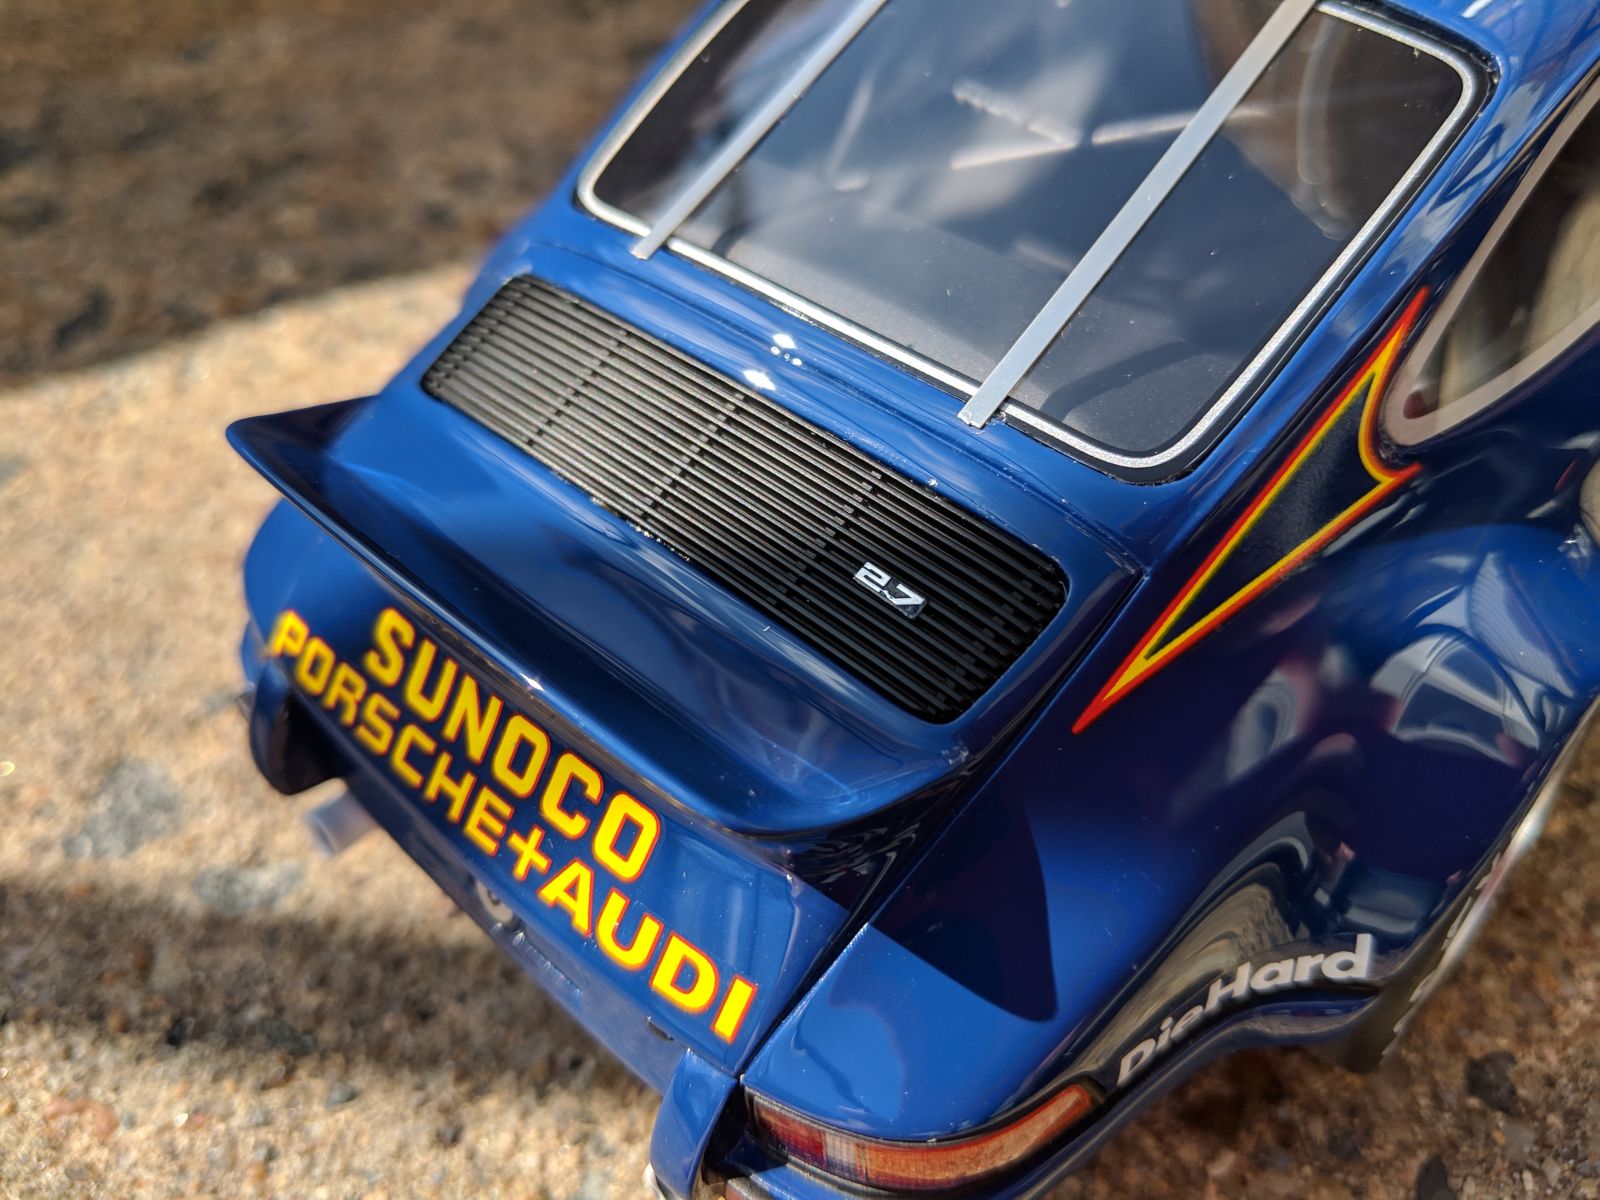 Illustration for article titled Happy Birthday To Me: Sunoco Blue Porsche 911 2.7RSR